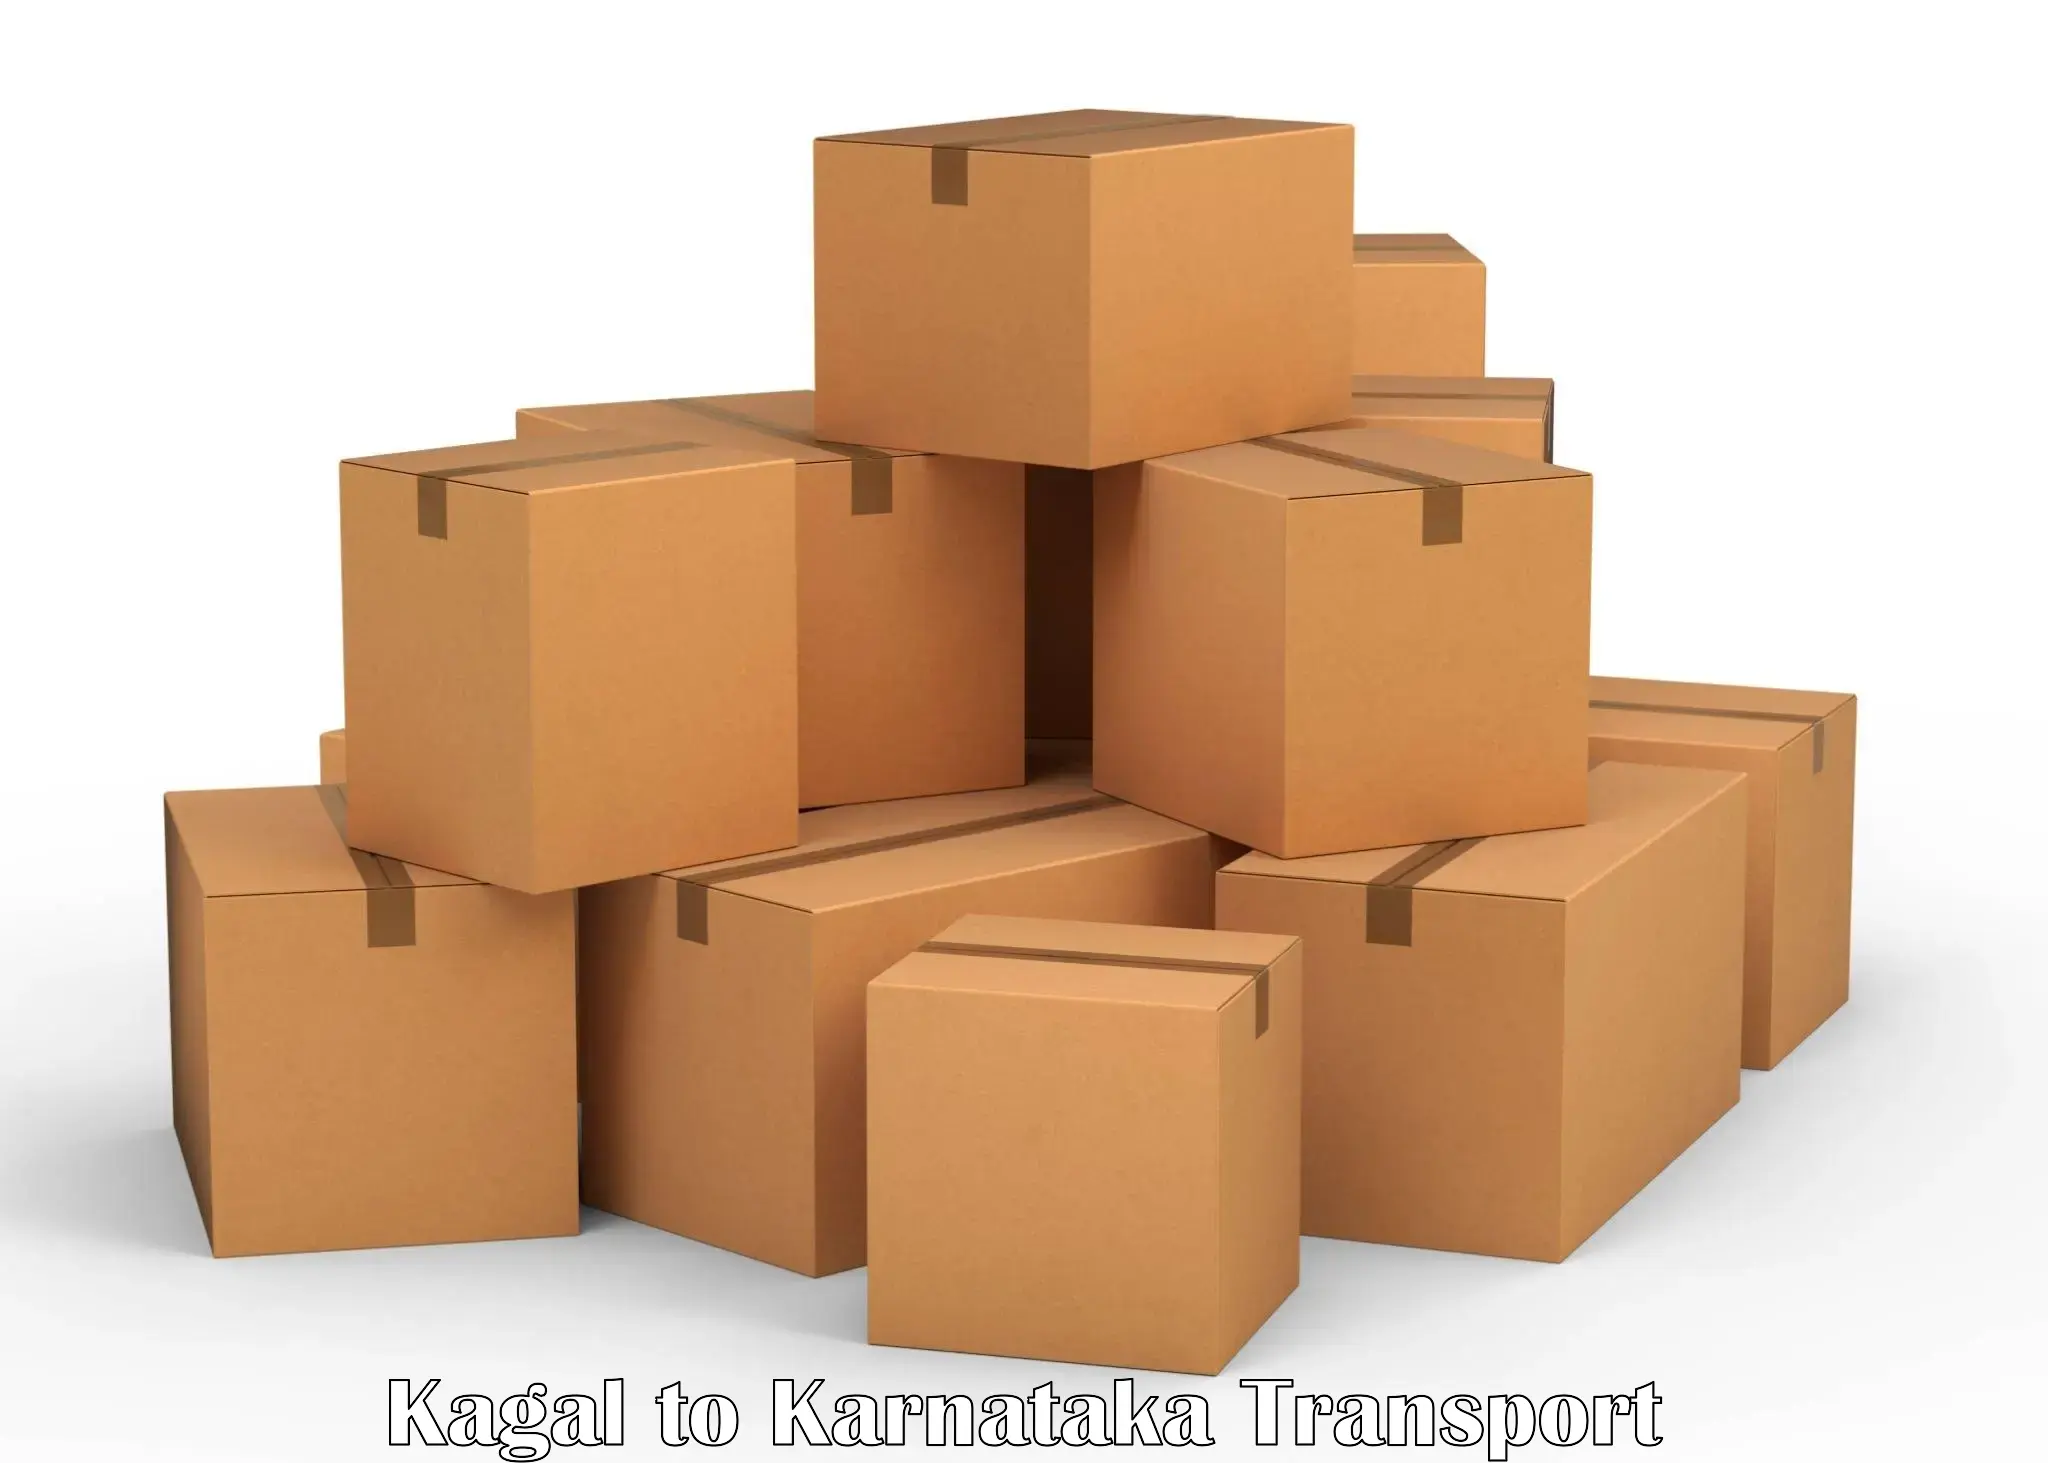 Cargo transportation services Kagal to Manipal